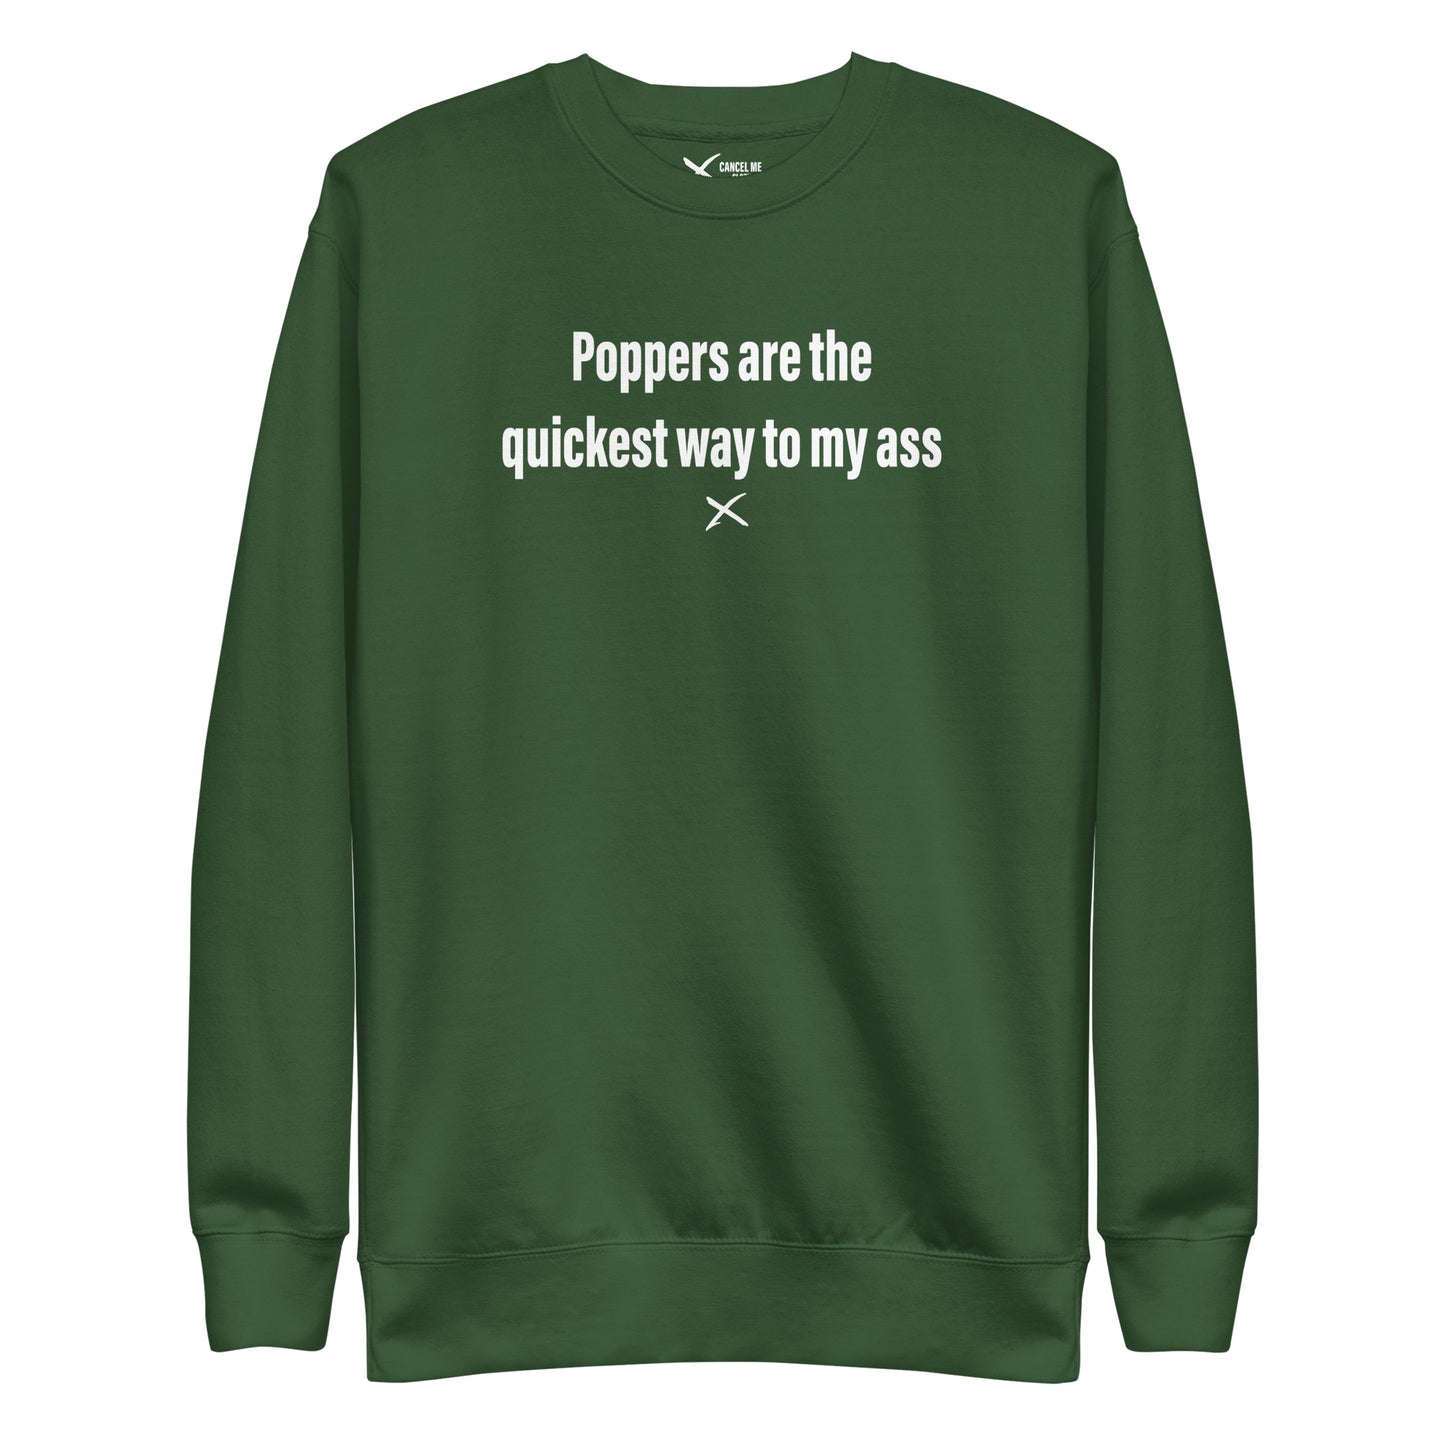 Poppers are the quickest way to my ass - Sweatshirt